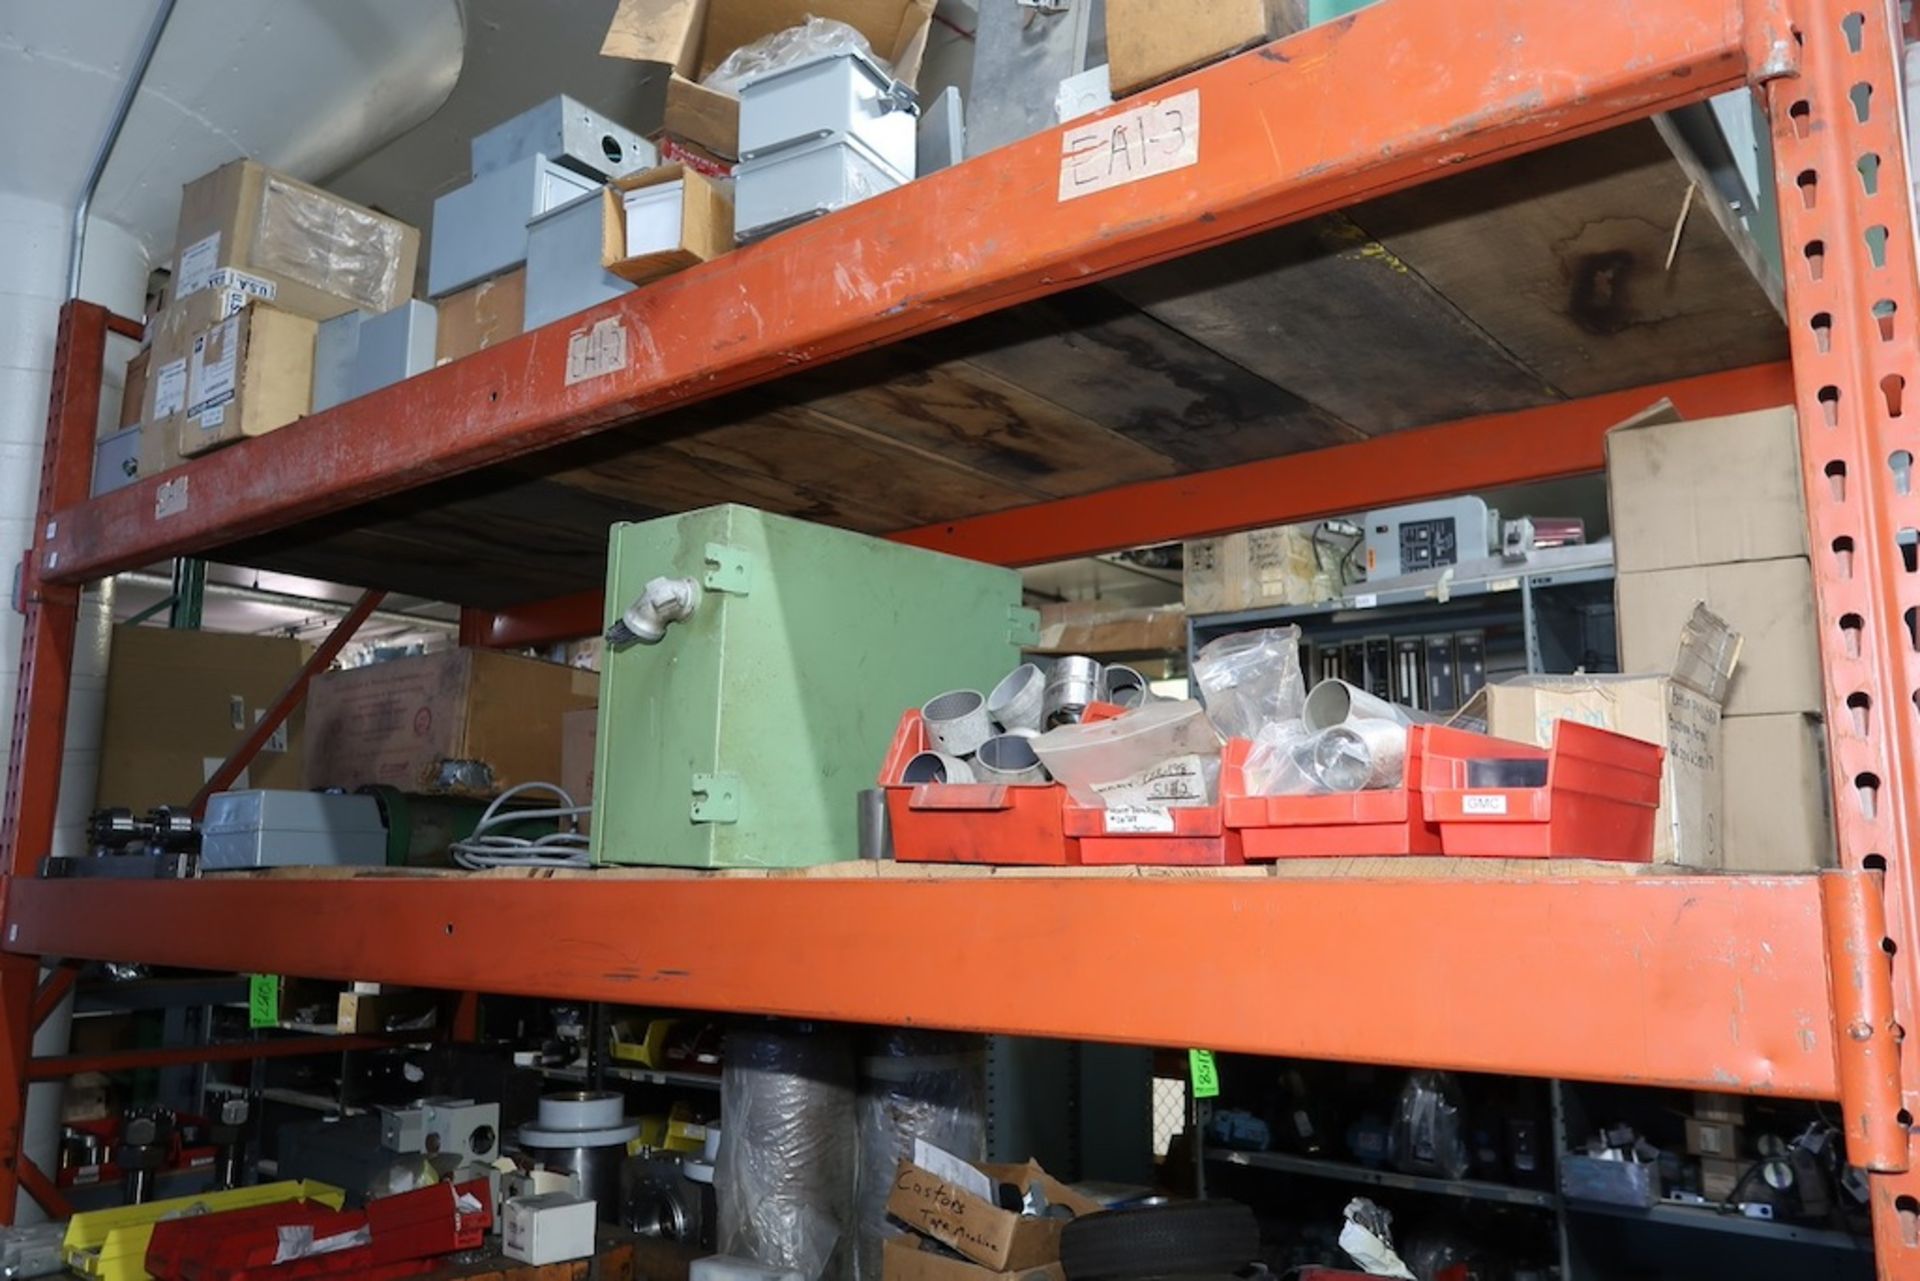 (1) Section of Pallet Racking with Assorted Spare Parts, Hydraulic Pumps, Heat Exchangers, Etc. - Image 3 of 18